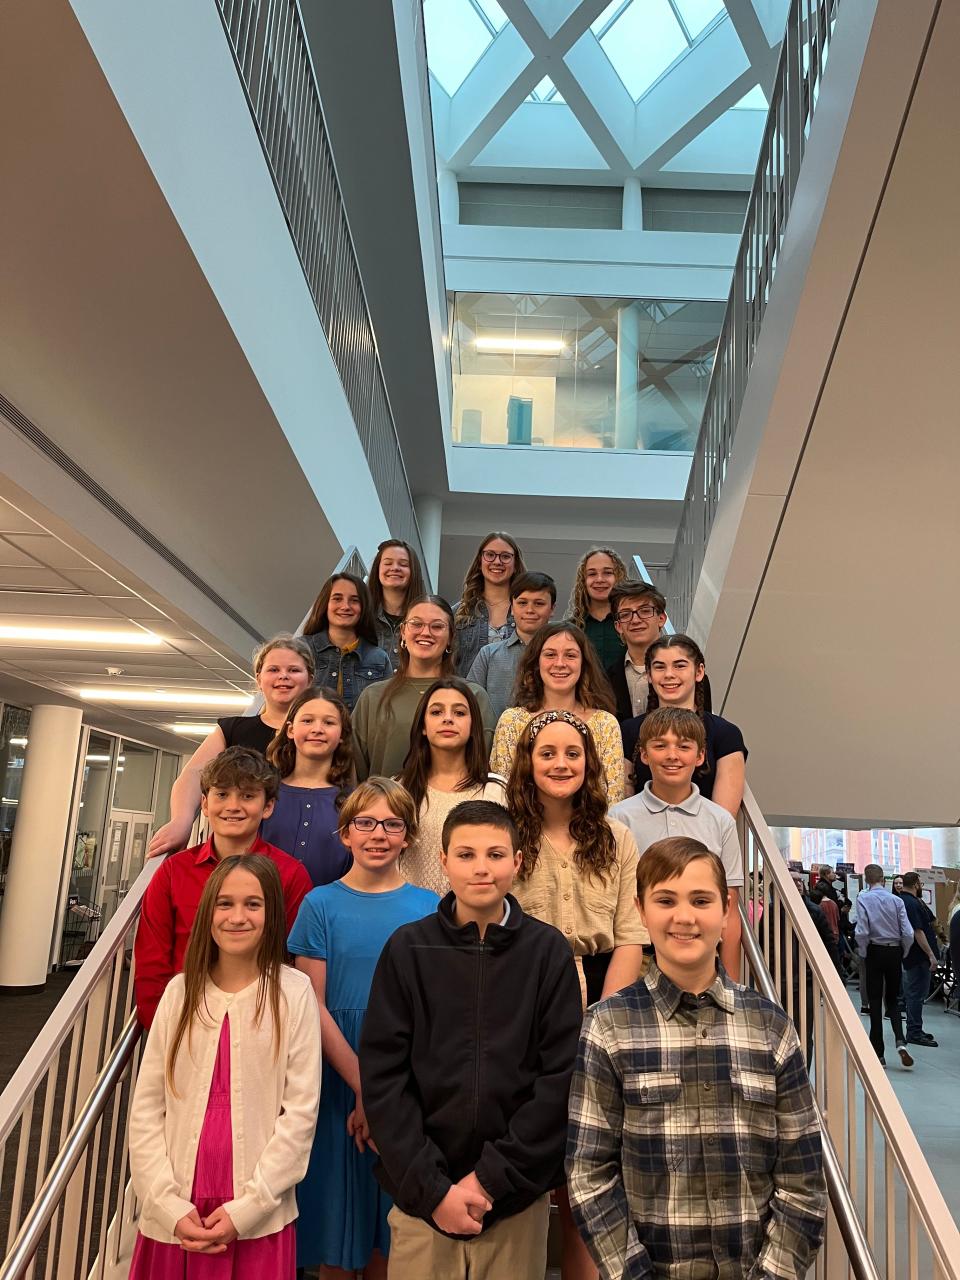 On March 23, Bishop Flaget sent nineteen students to the District 12 Science Fair at Ohio University.